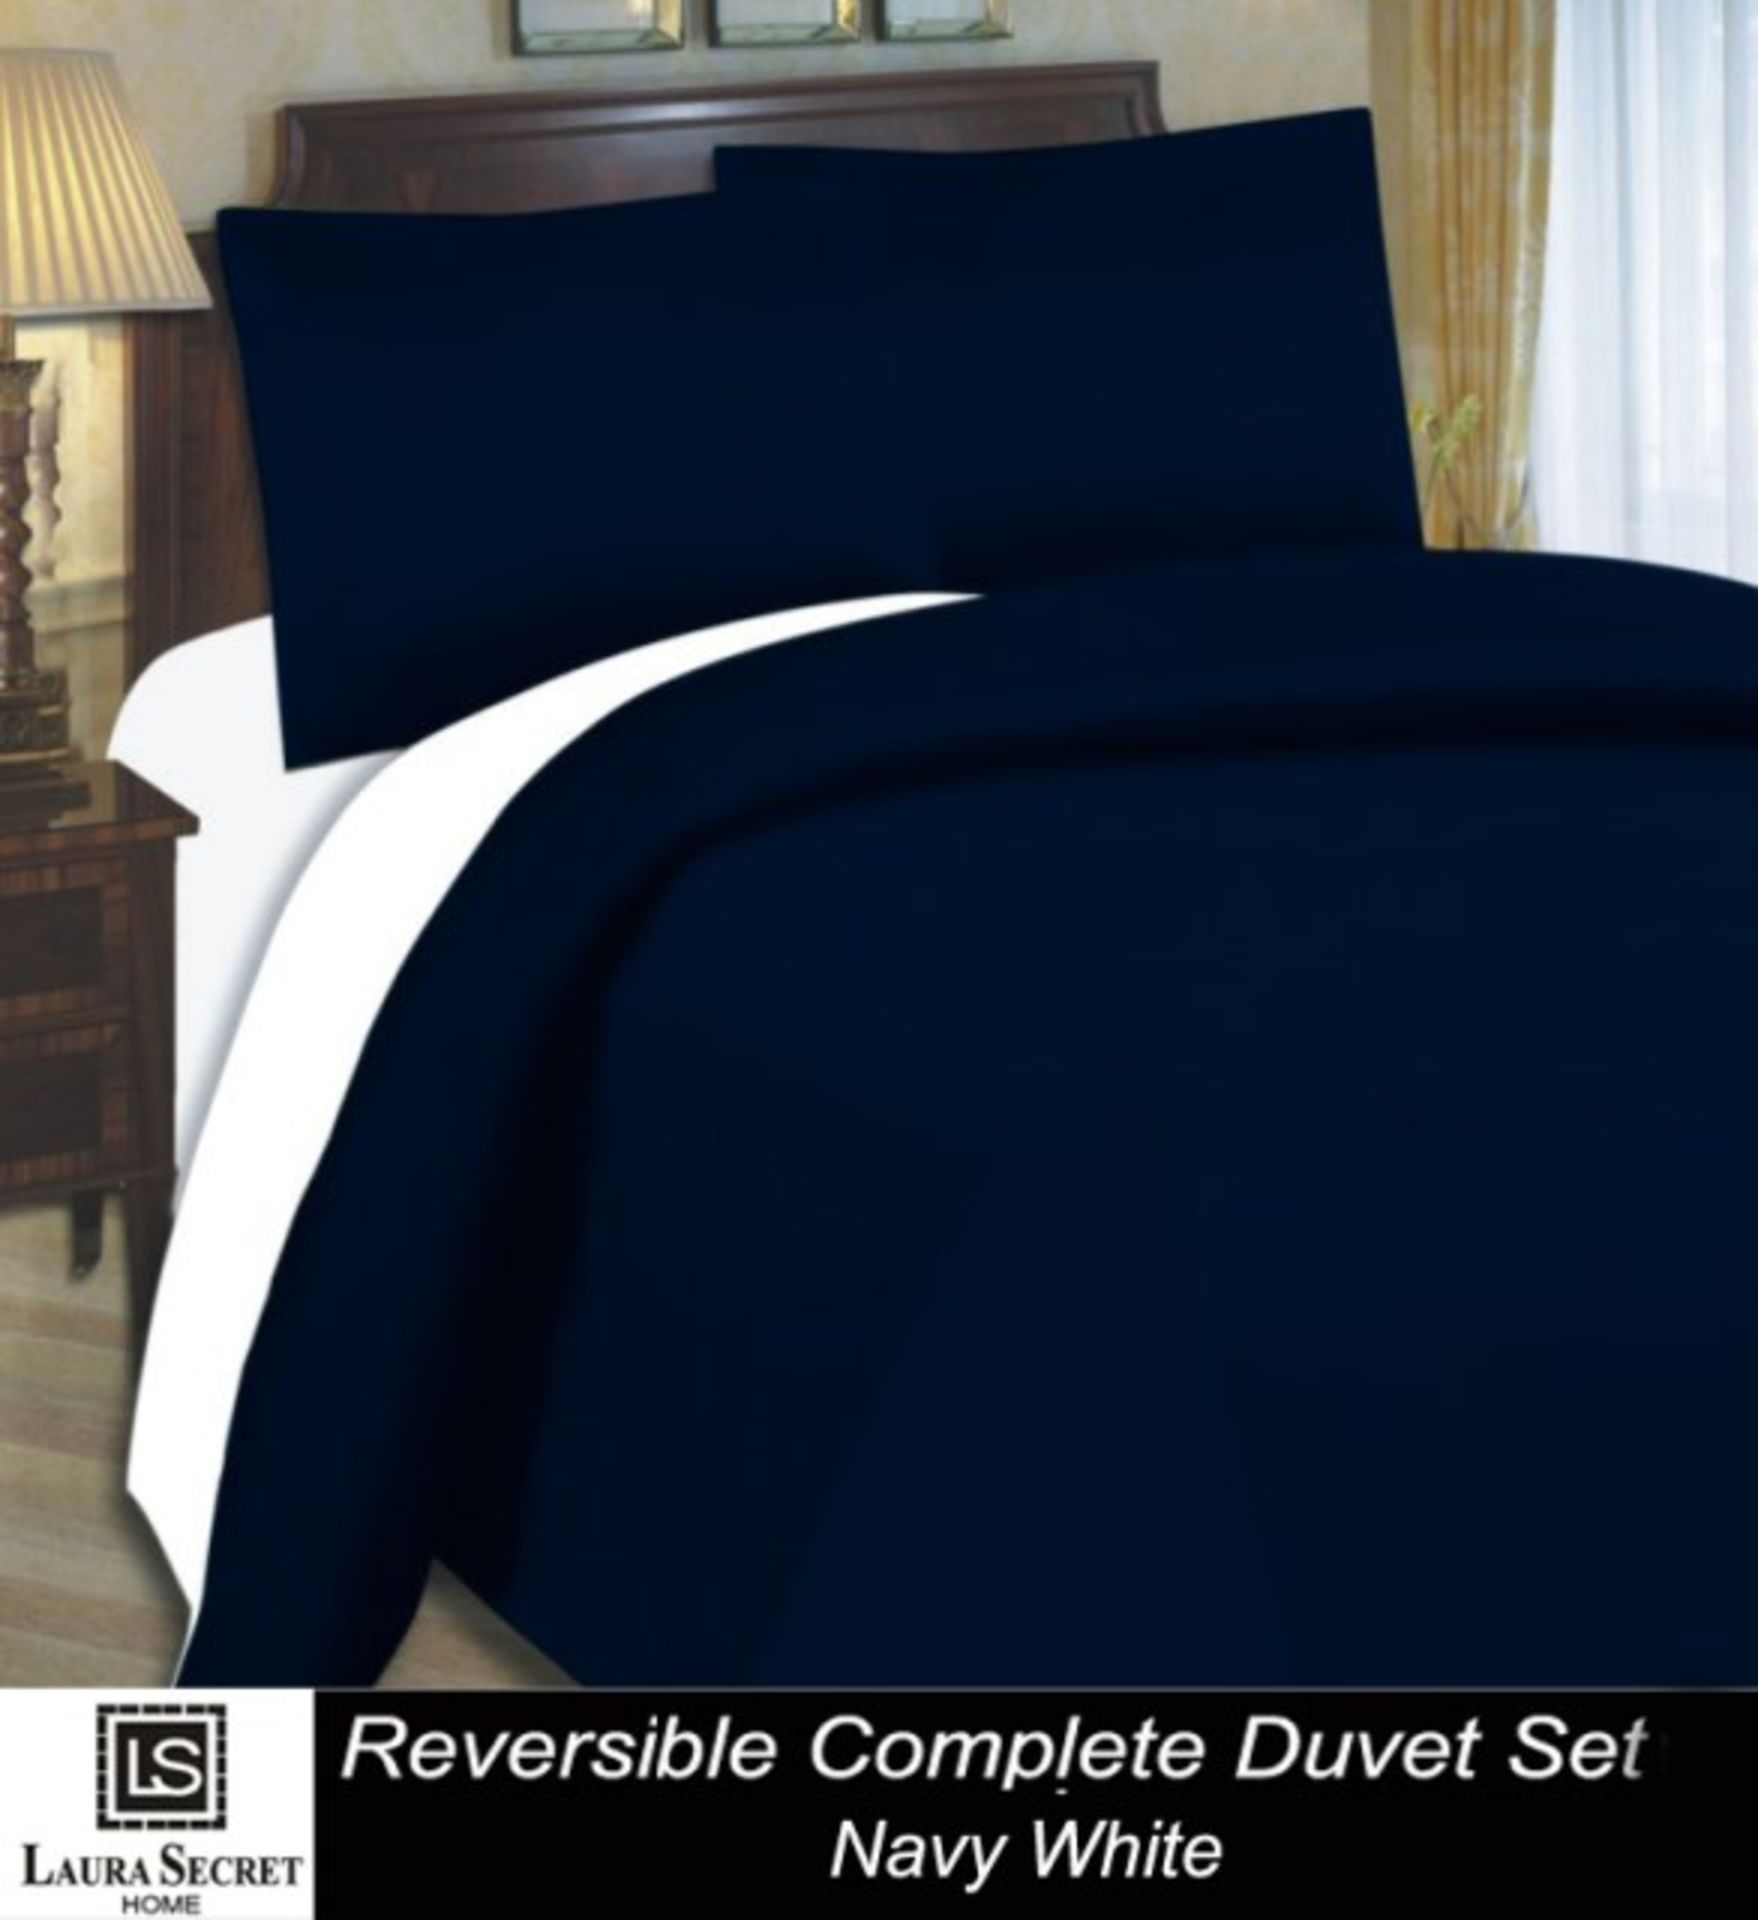 V Brand New Complete 4 piece King Size Reversible Bed Set Blue White Includes - 1 Duvet Cover - 1